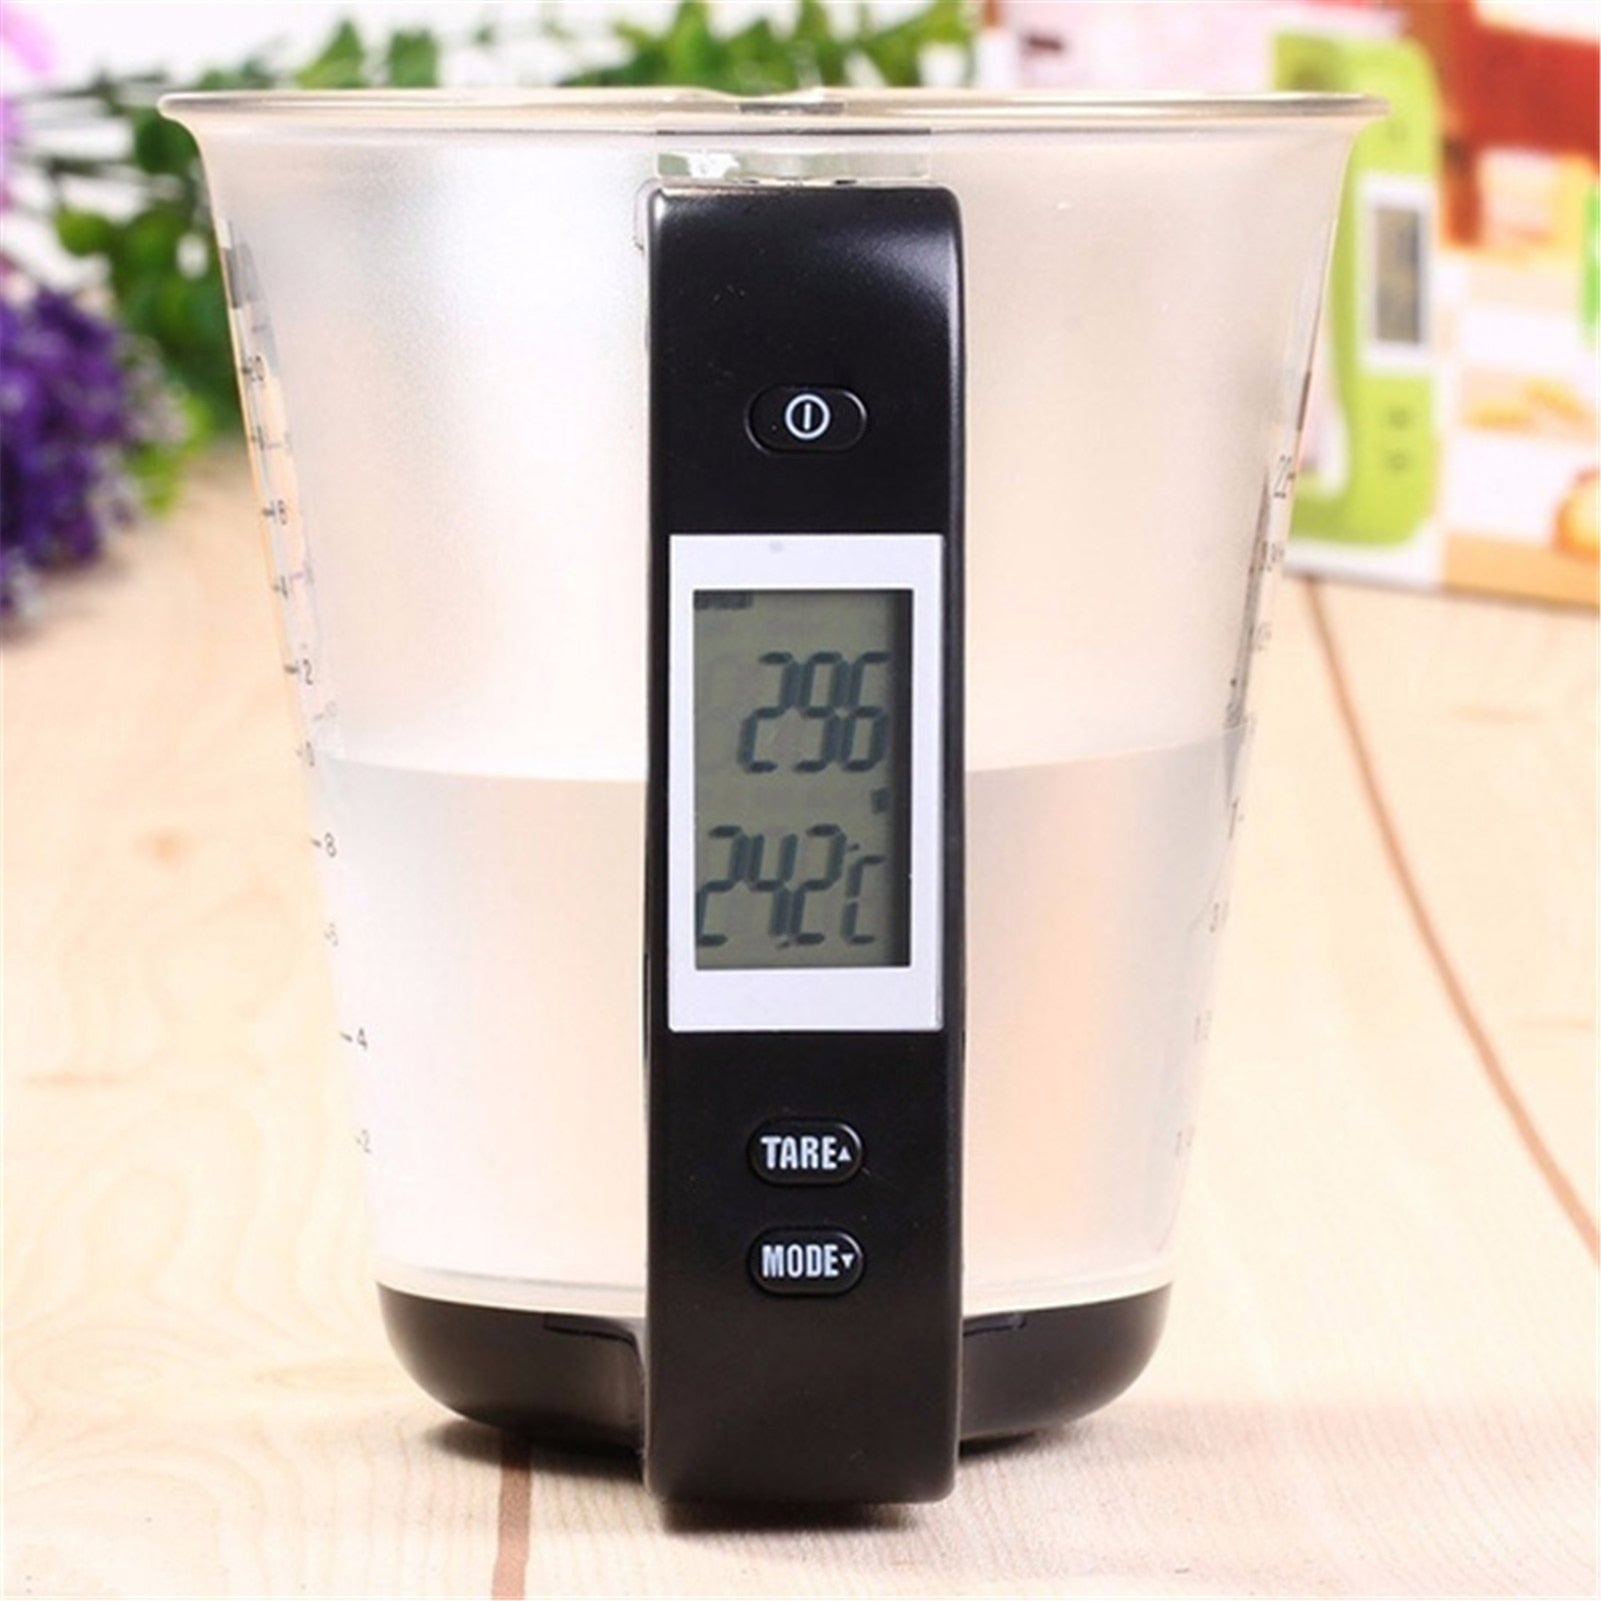 1000g Electronic Digital Kitchen Measurement Cup with LCD Display